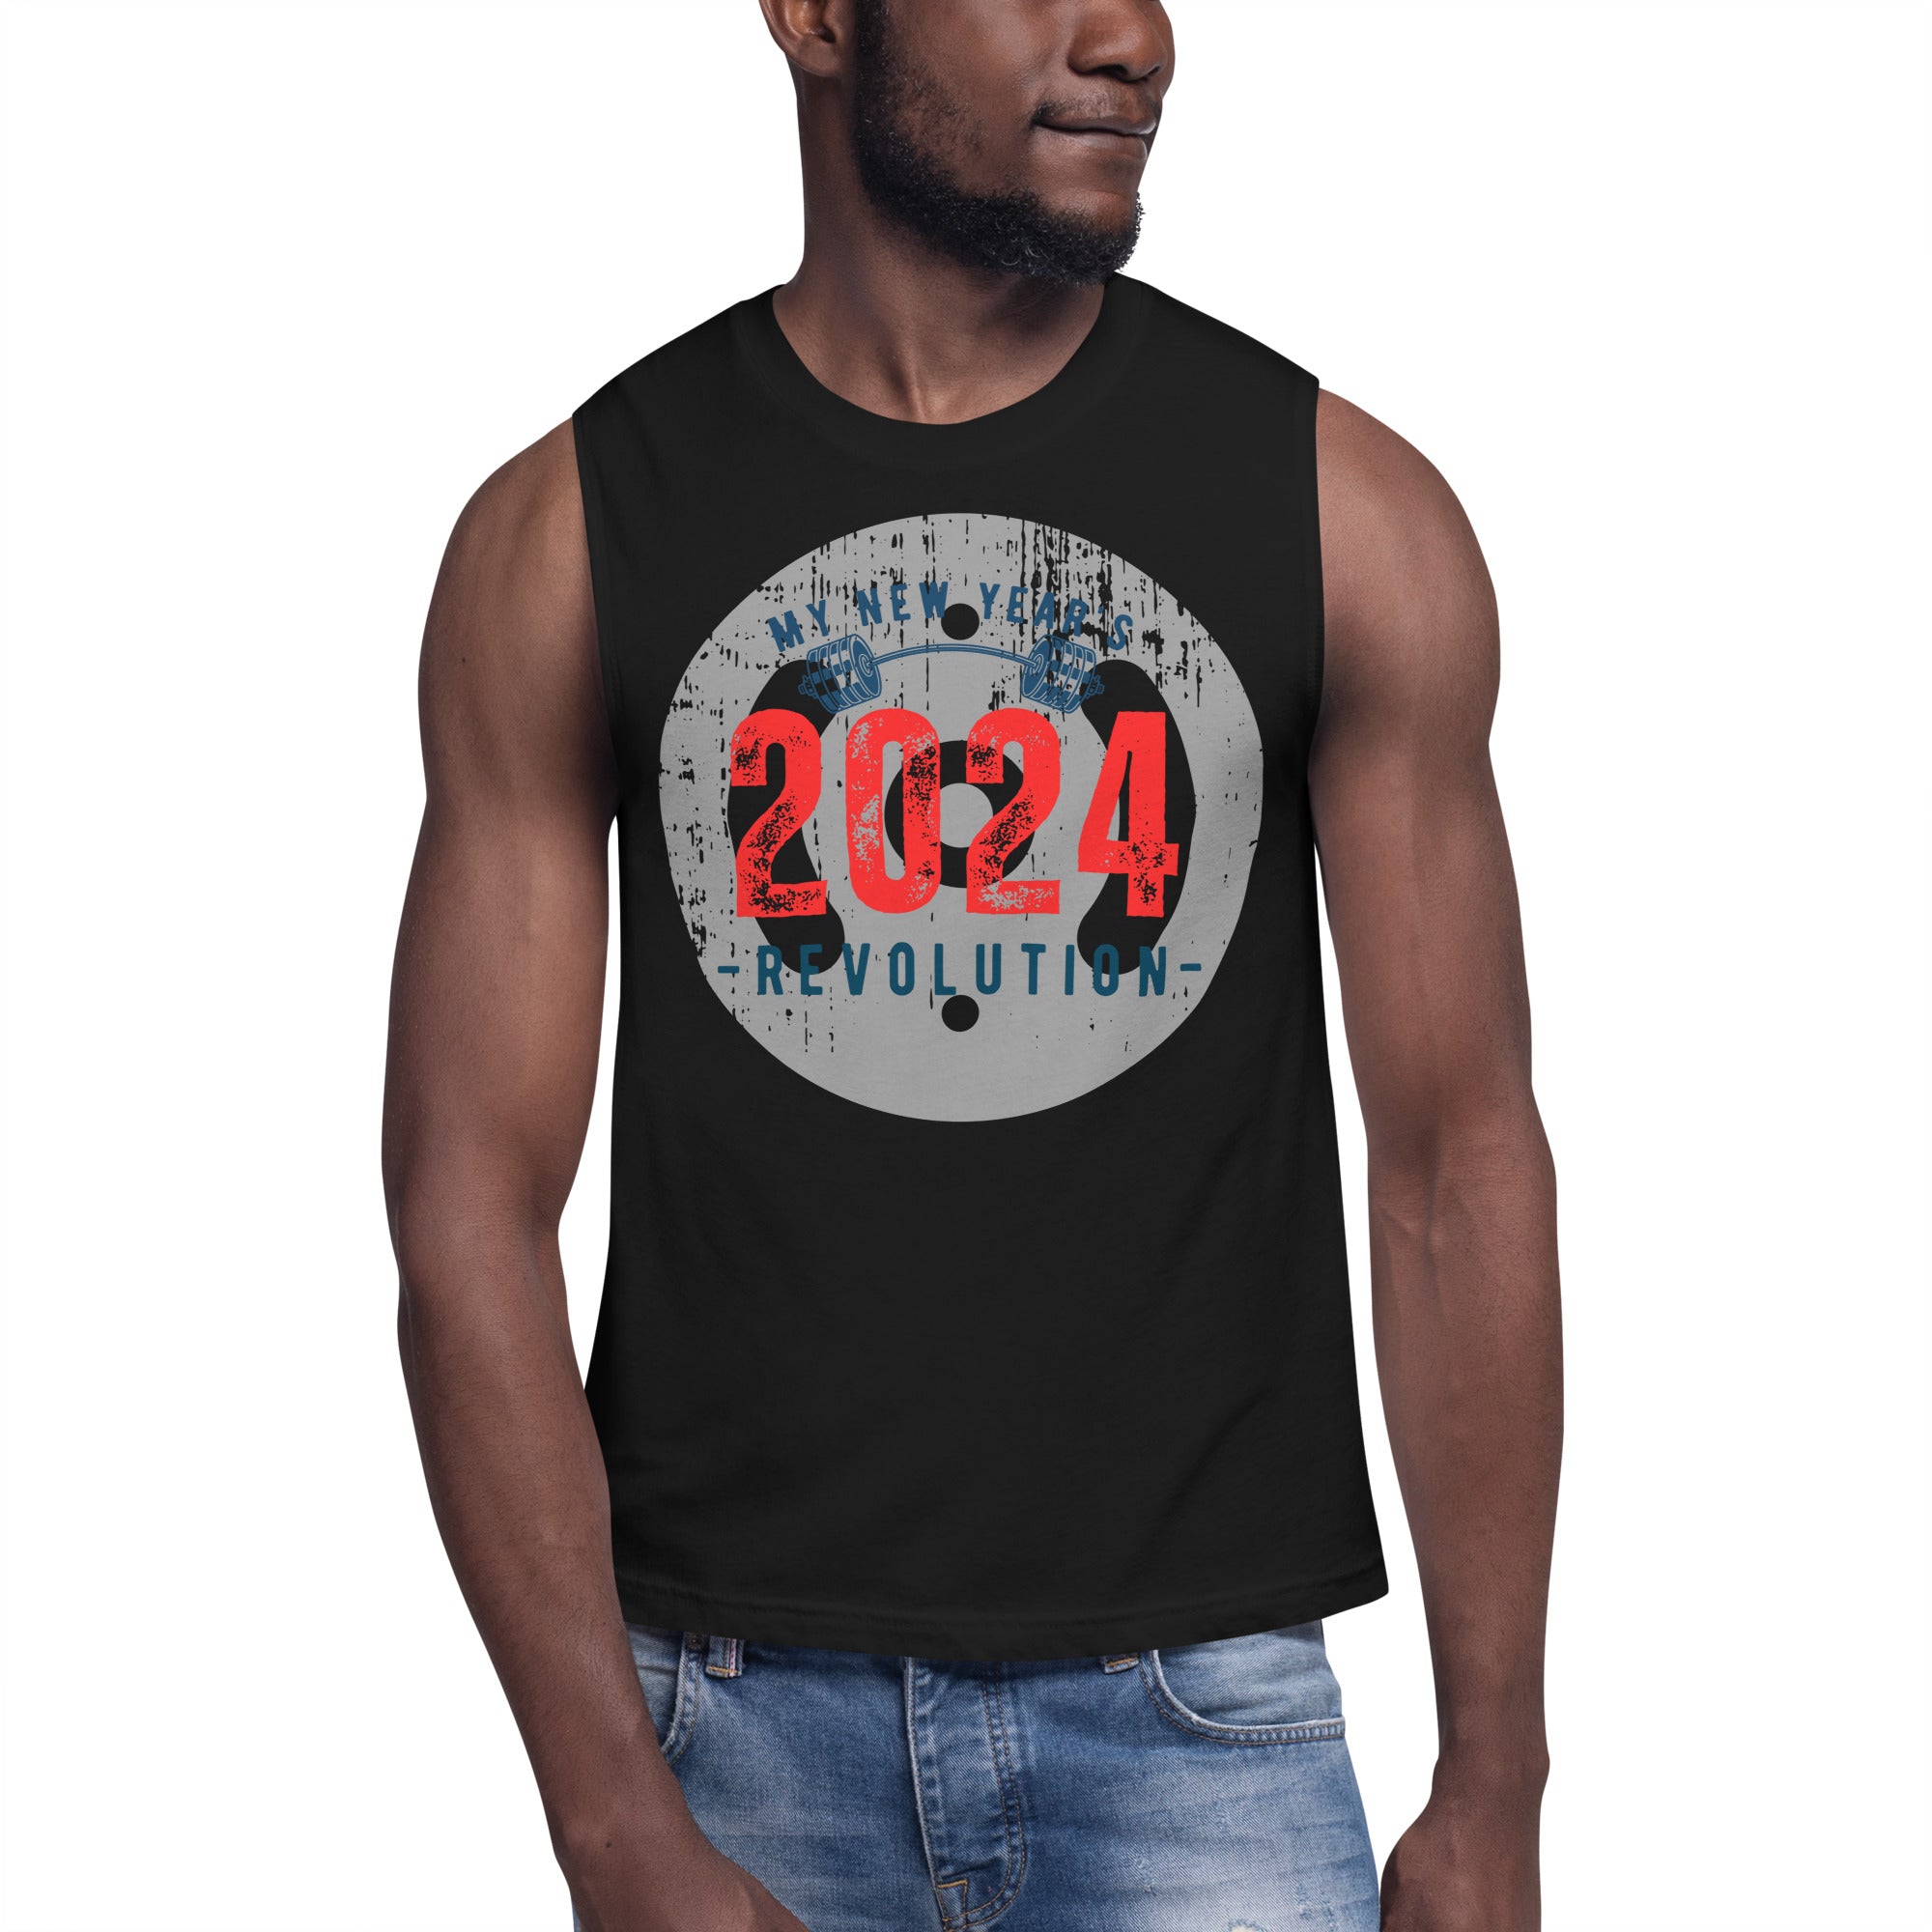 New Year's Revolution Muscle Shirt